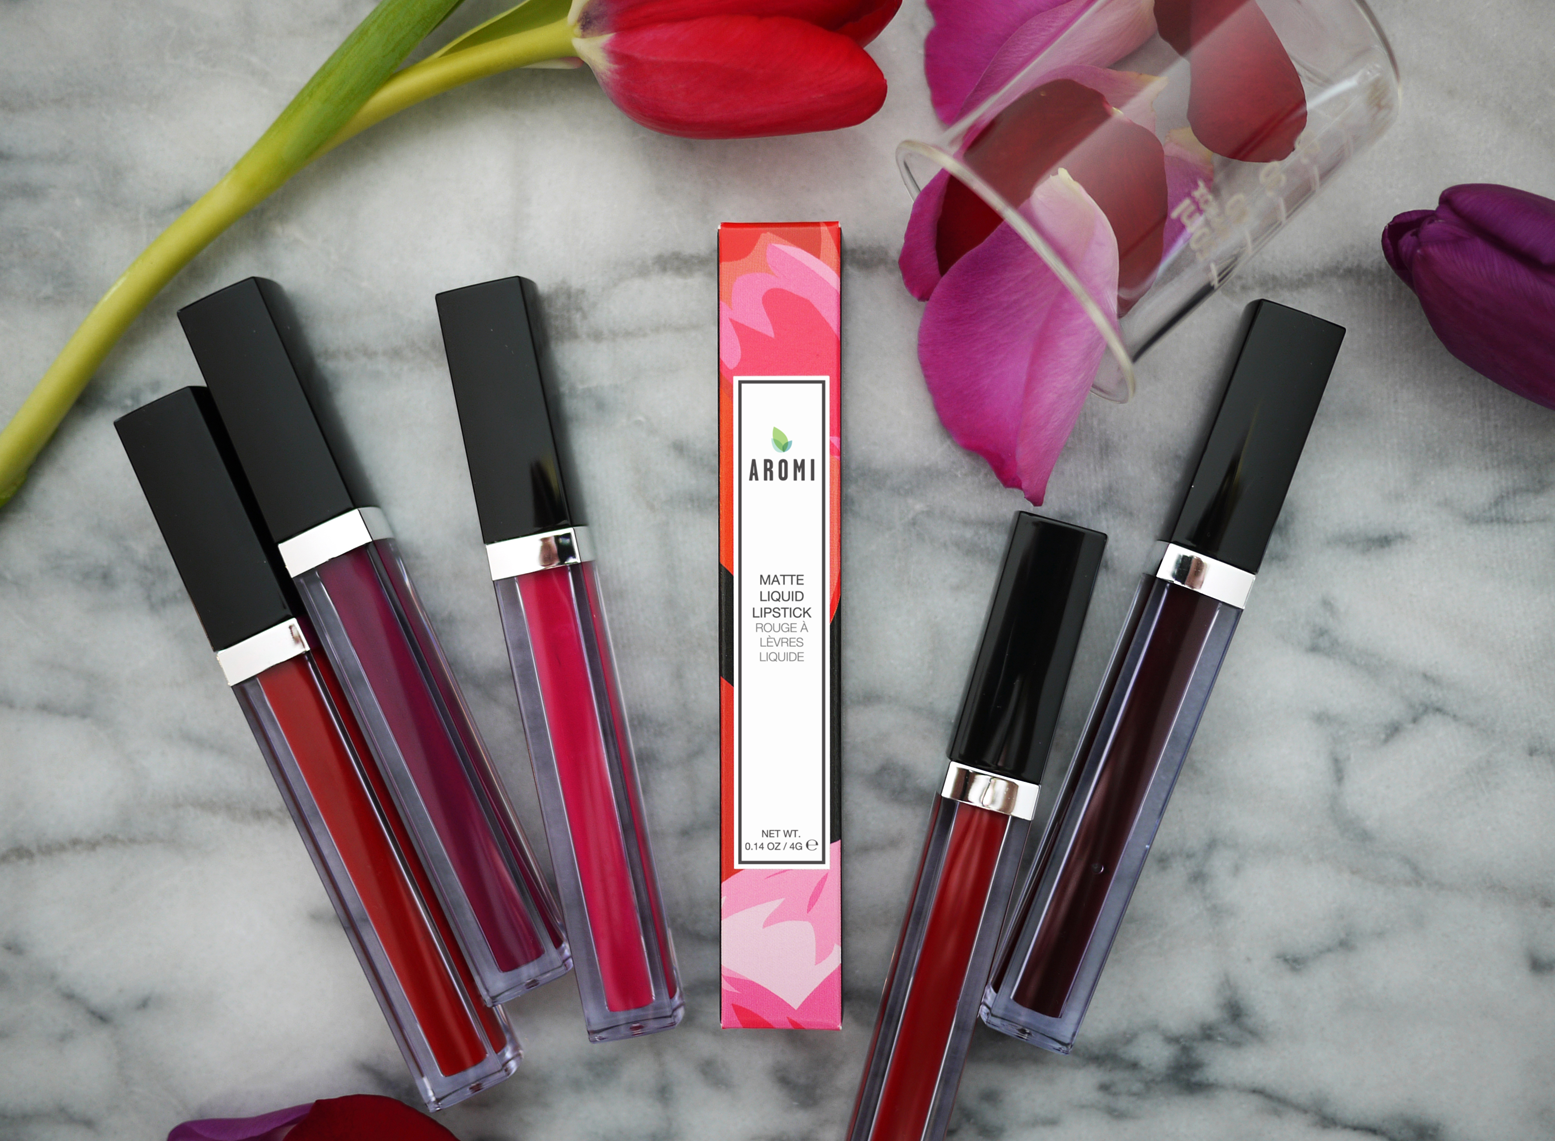 Aromi Liquid Lipsticks go on like a gloss and dry to a matte finish in about one minute. As always, Aromi liquid lipsticks are handmade, vegan, cruelty-free, and gluten free.